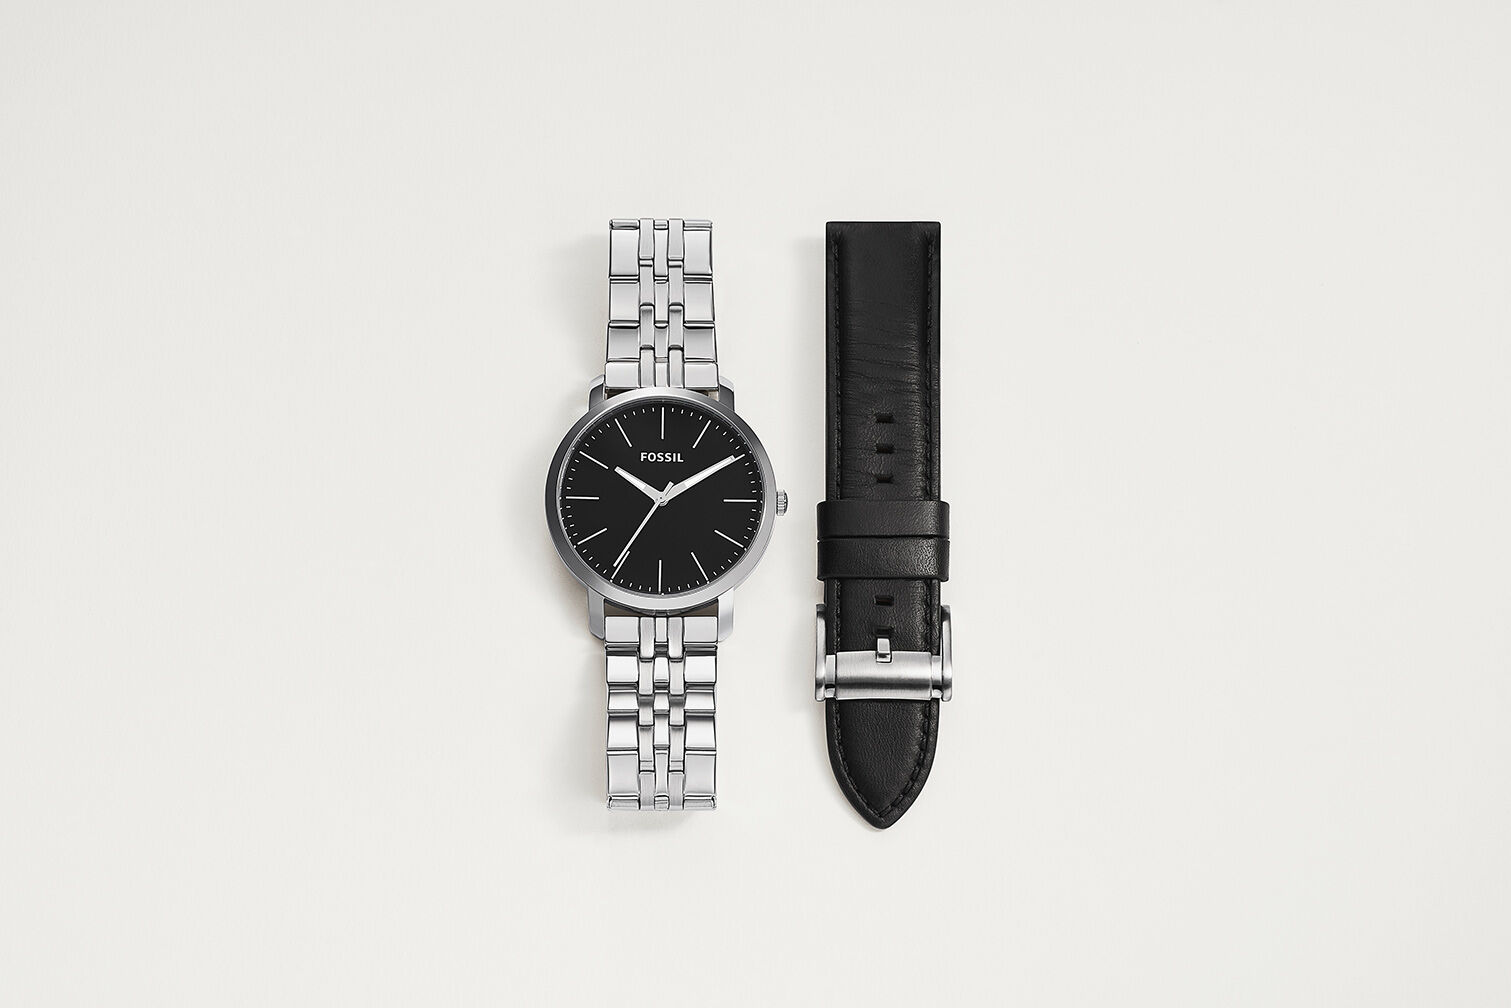 A silver men's stainless steel watch lying next to a leather interchangeable watch strap.